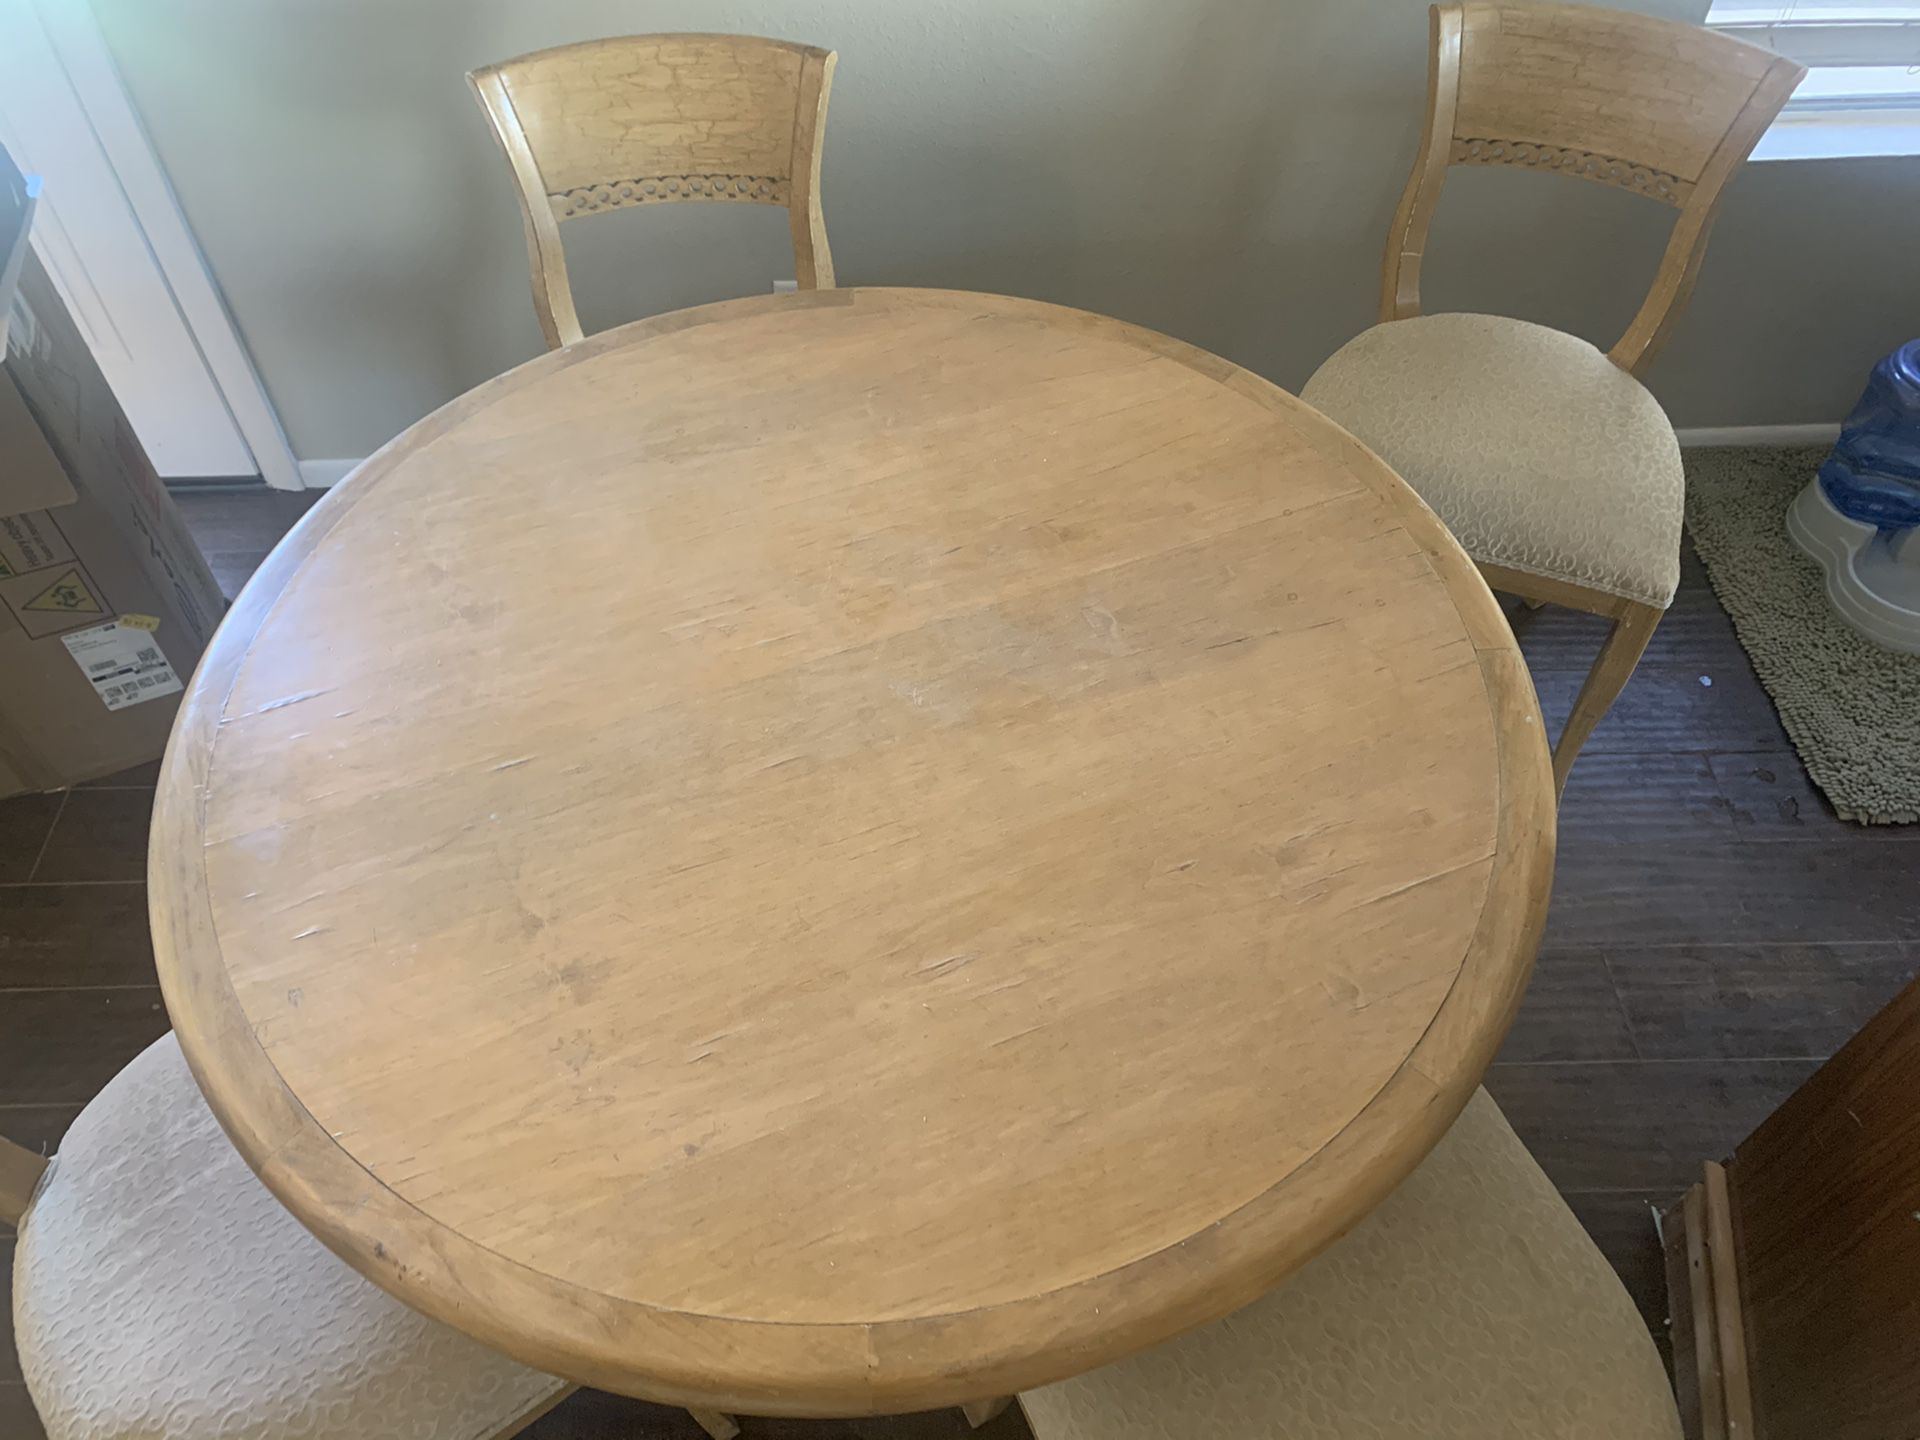 Shabby Chic Breakfast / Dining Table with 4 Chairs